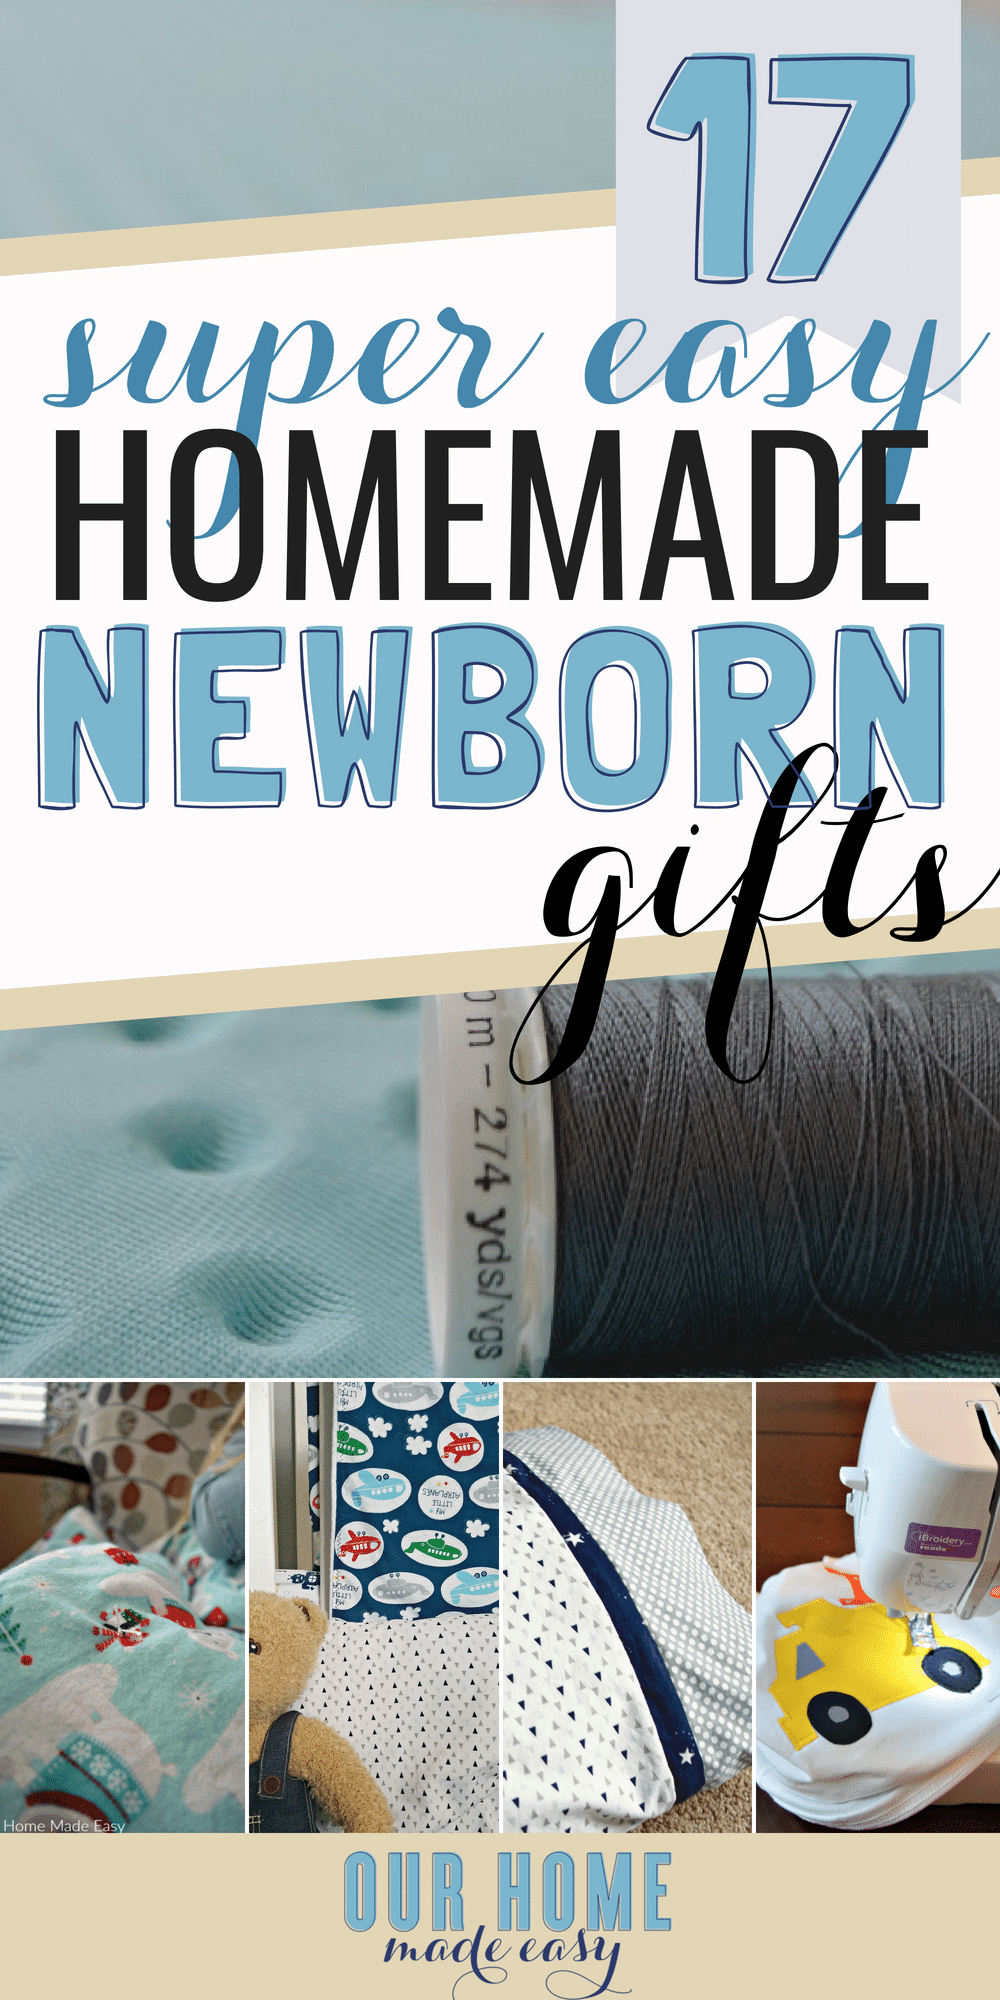 Any new mom will love these homemade baby gifts! Easy tutorials for any beginner sewer!